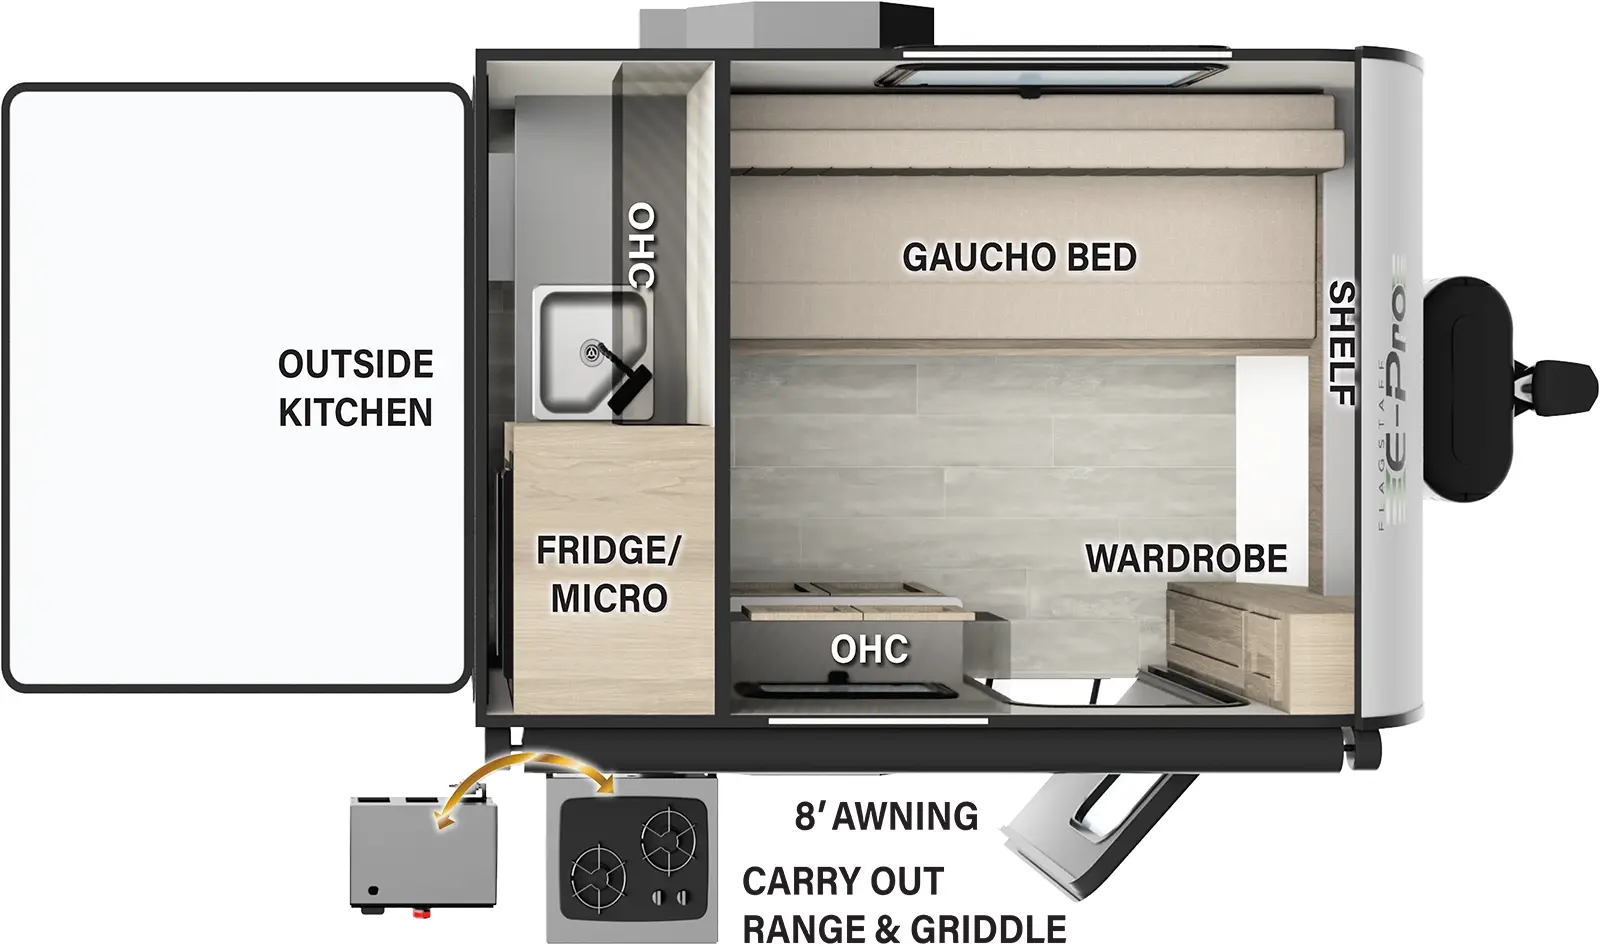 The E12S has one entry and zero slideouts. Exterior features 8 foot awning, carry-out range and griddle, and rear outside kitchen with overhead cabinet, microwave and refrigerator. Interior layout front to back: front shelf, off-door side gaucho bed, and door side wardrobe, entry, and overhead cabinet.